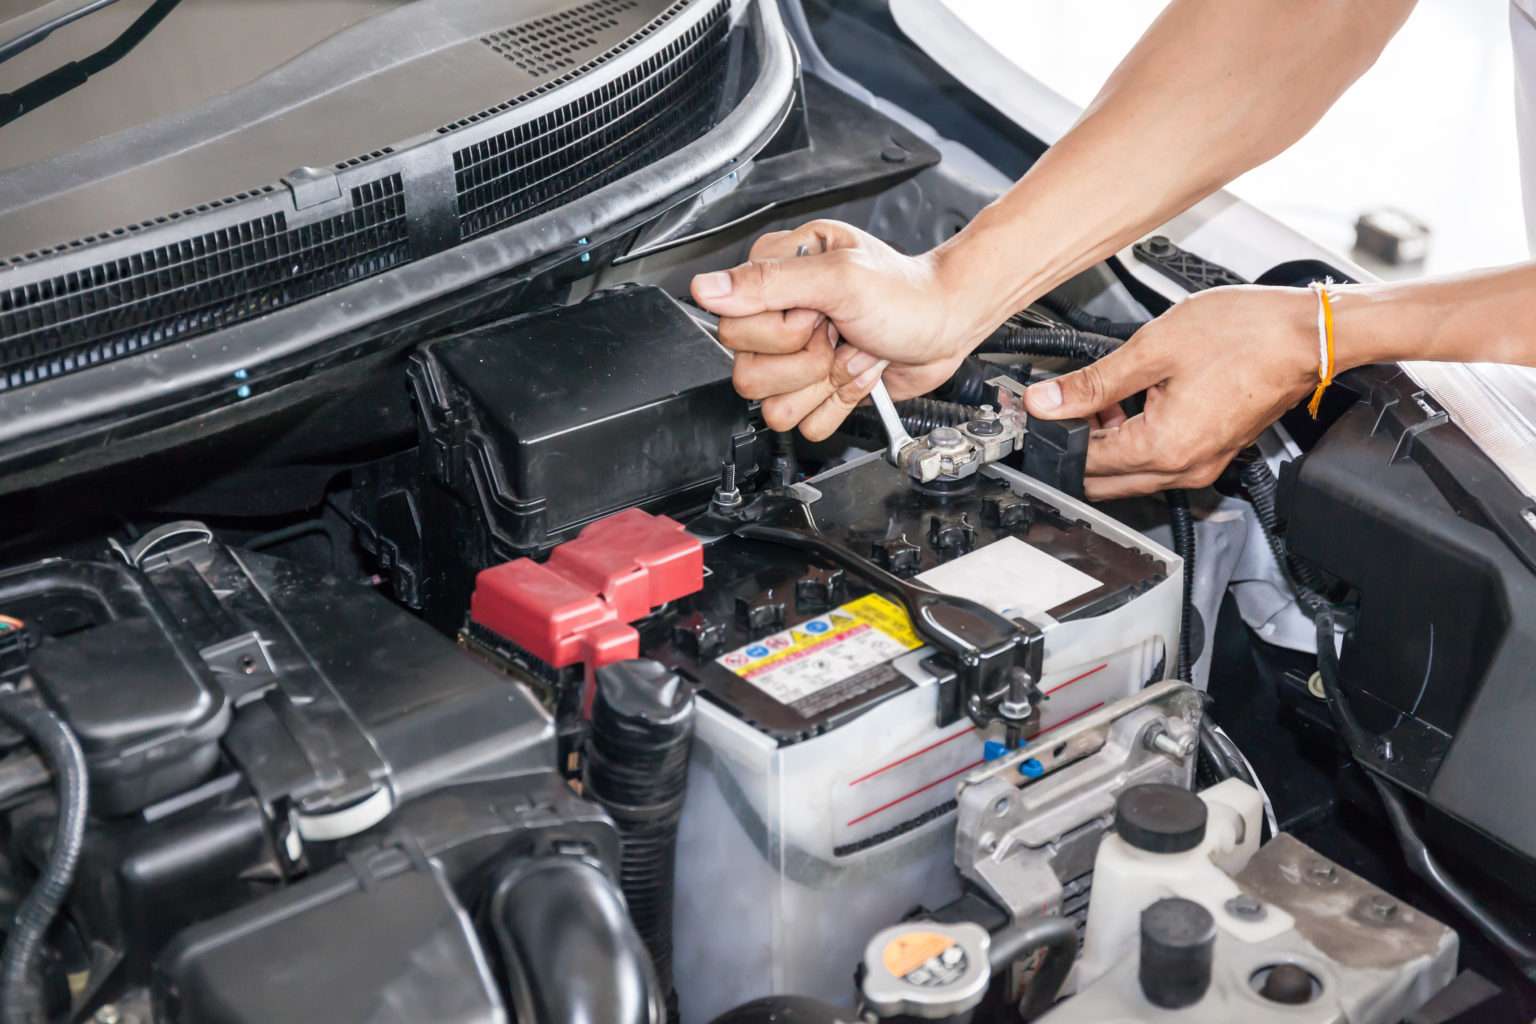 How to Disconnect and Change a Car Battery â Go Girl